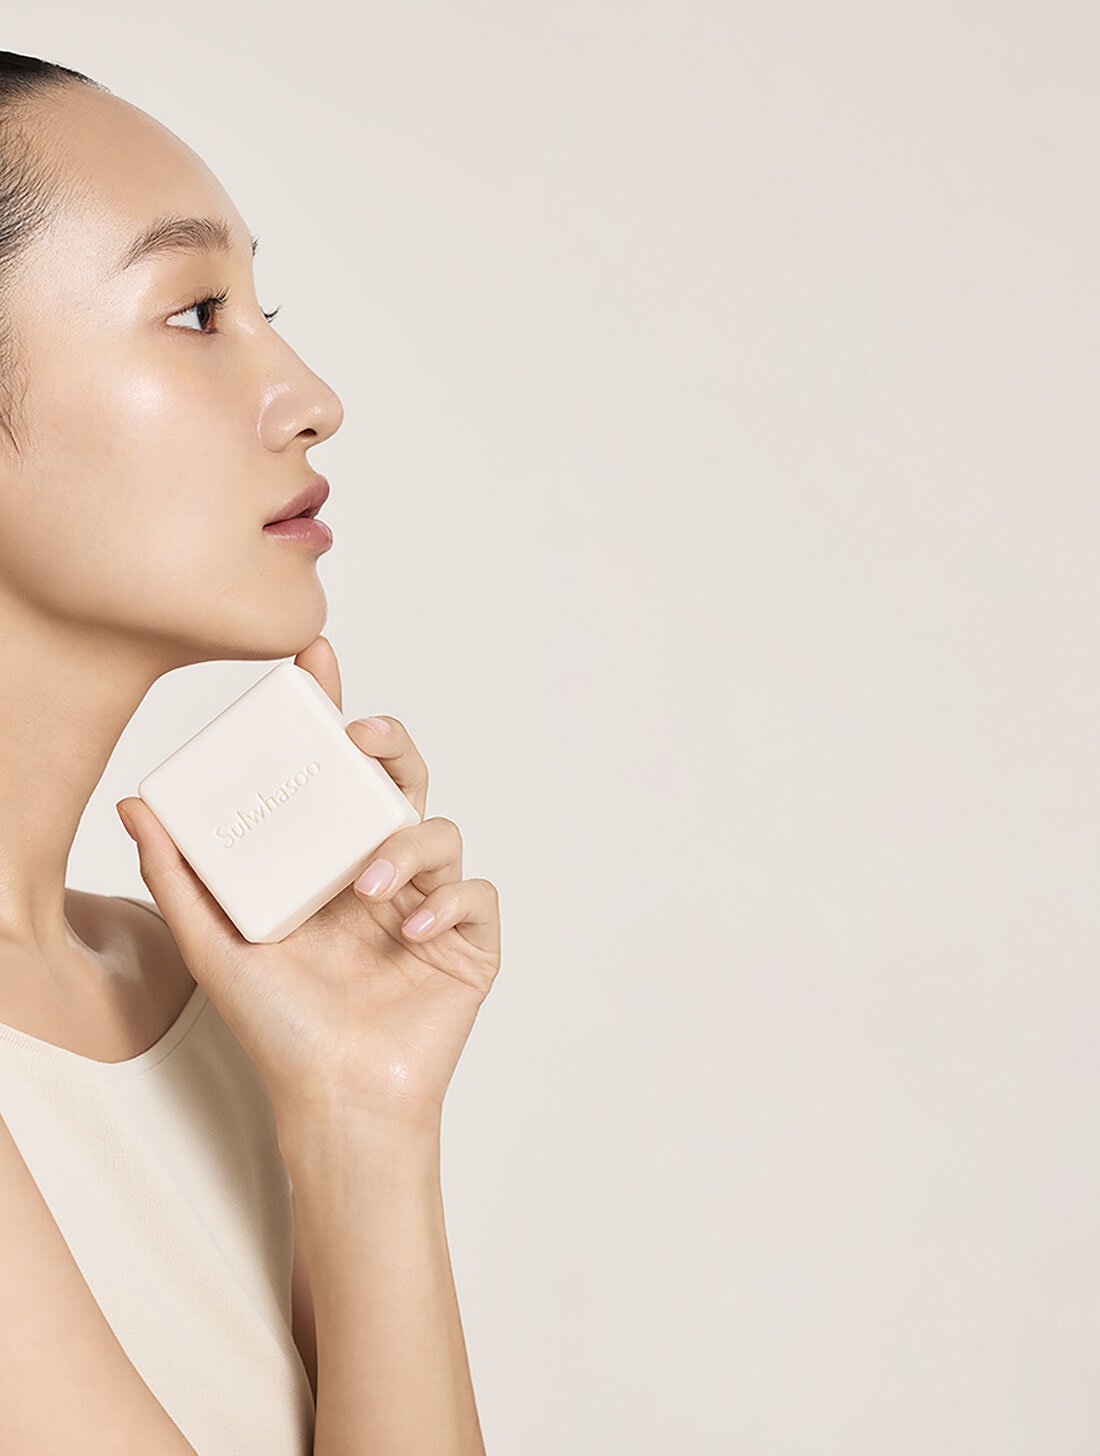 Model with Signature Ginseng Facial Soap in hand